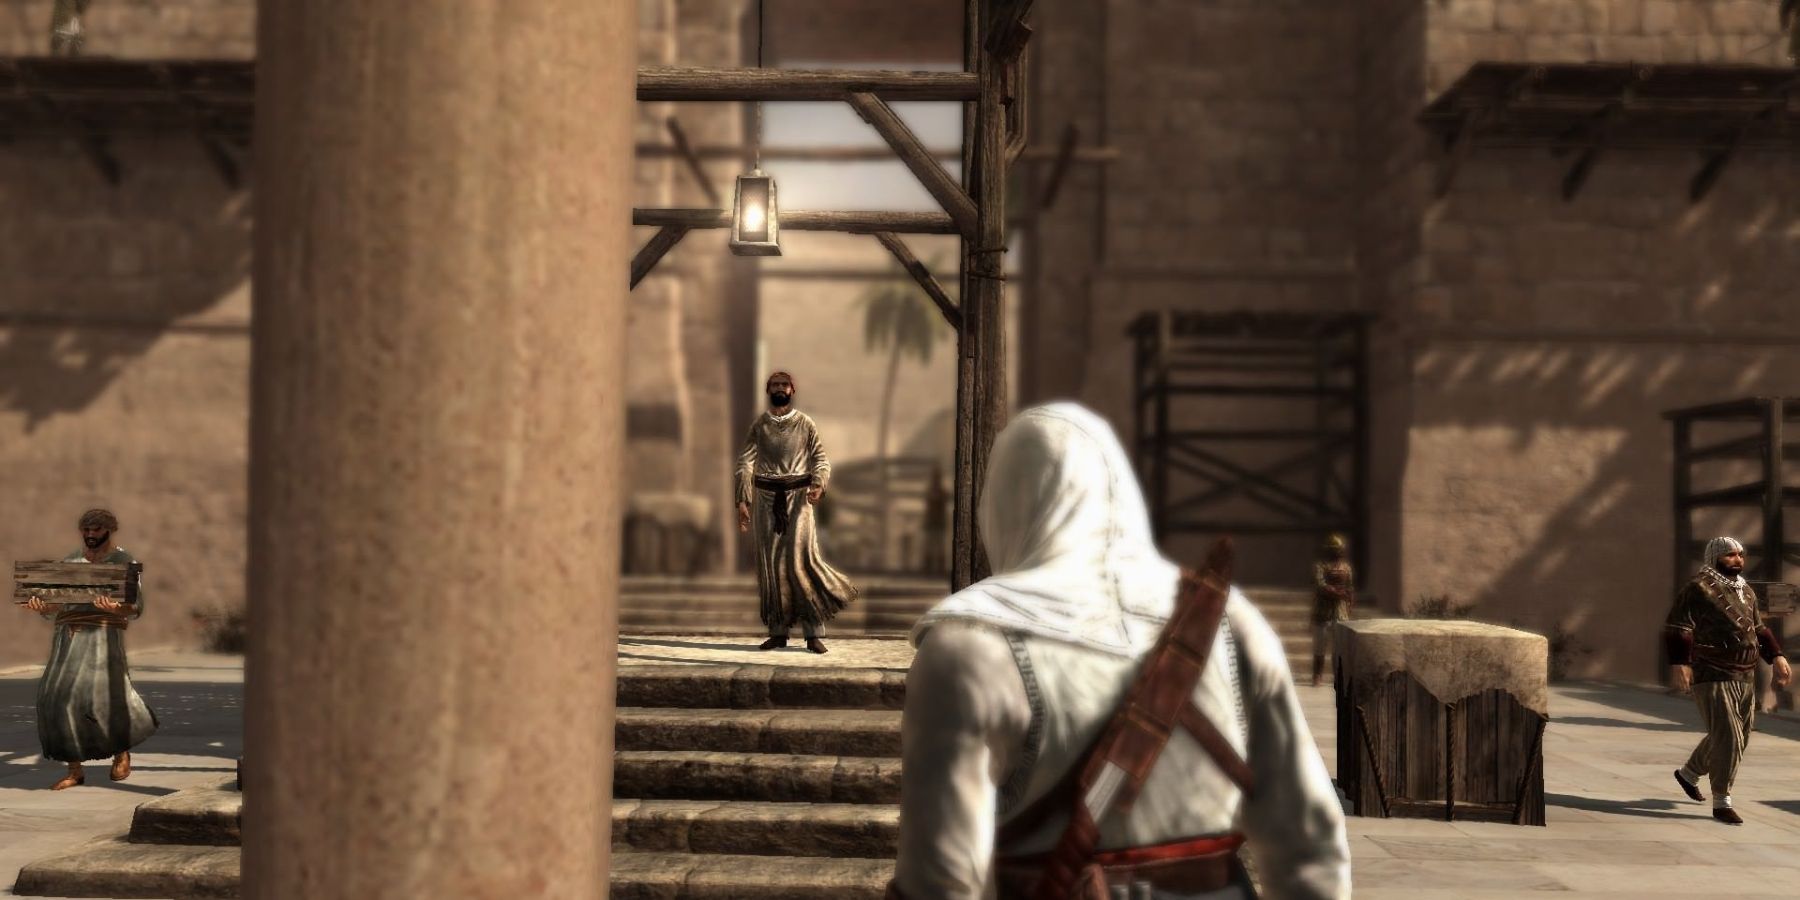 Walking through town in Assassin's Creed